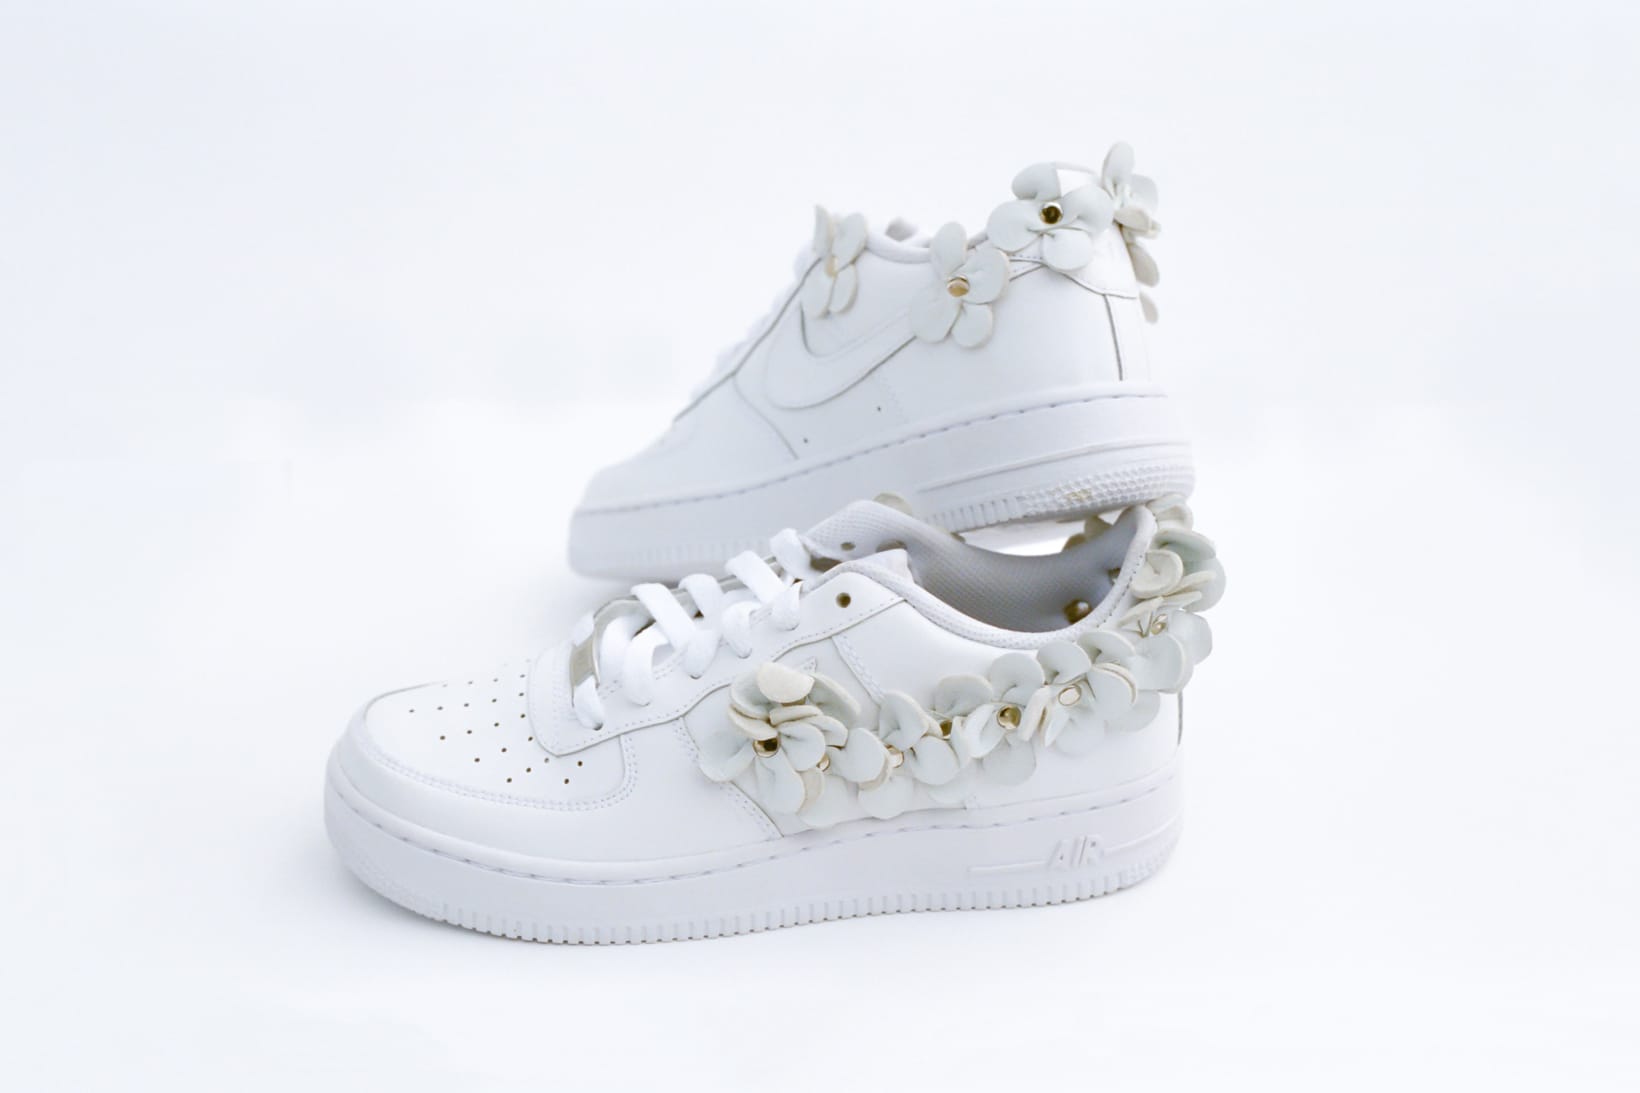 White Flowers Cover Nike's Air Force 1 